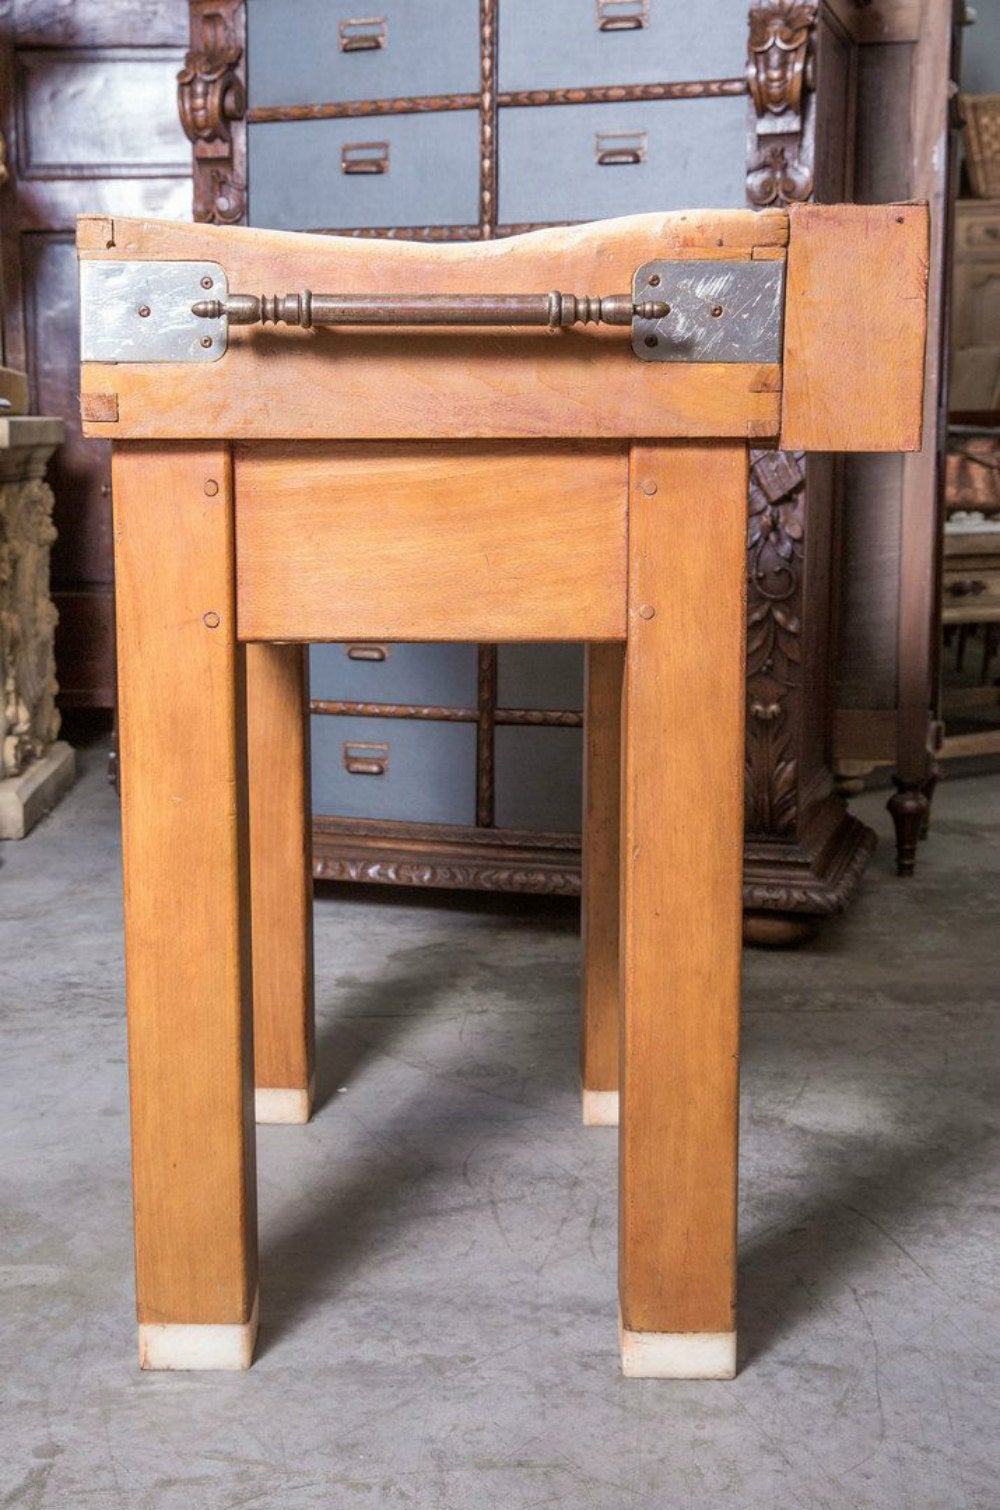 French billot de boucher (butcher block) on four legged stand. The thick top has a distressed patina and slight unevenness from decades of use in a French boucherie. Knife slot along the back of the chopping surface and towel bar mounted on side.